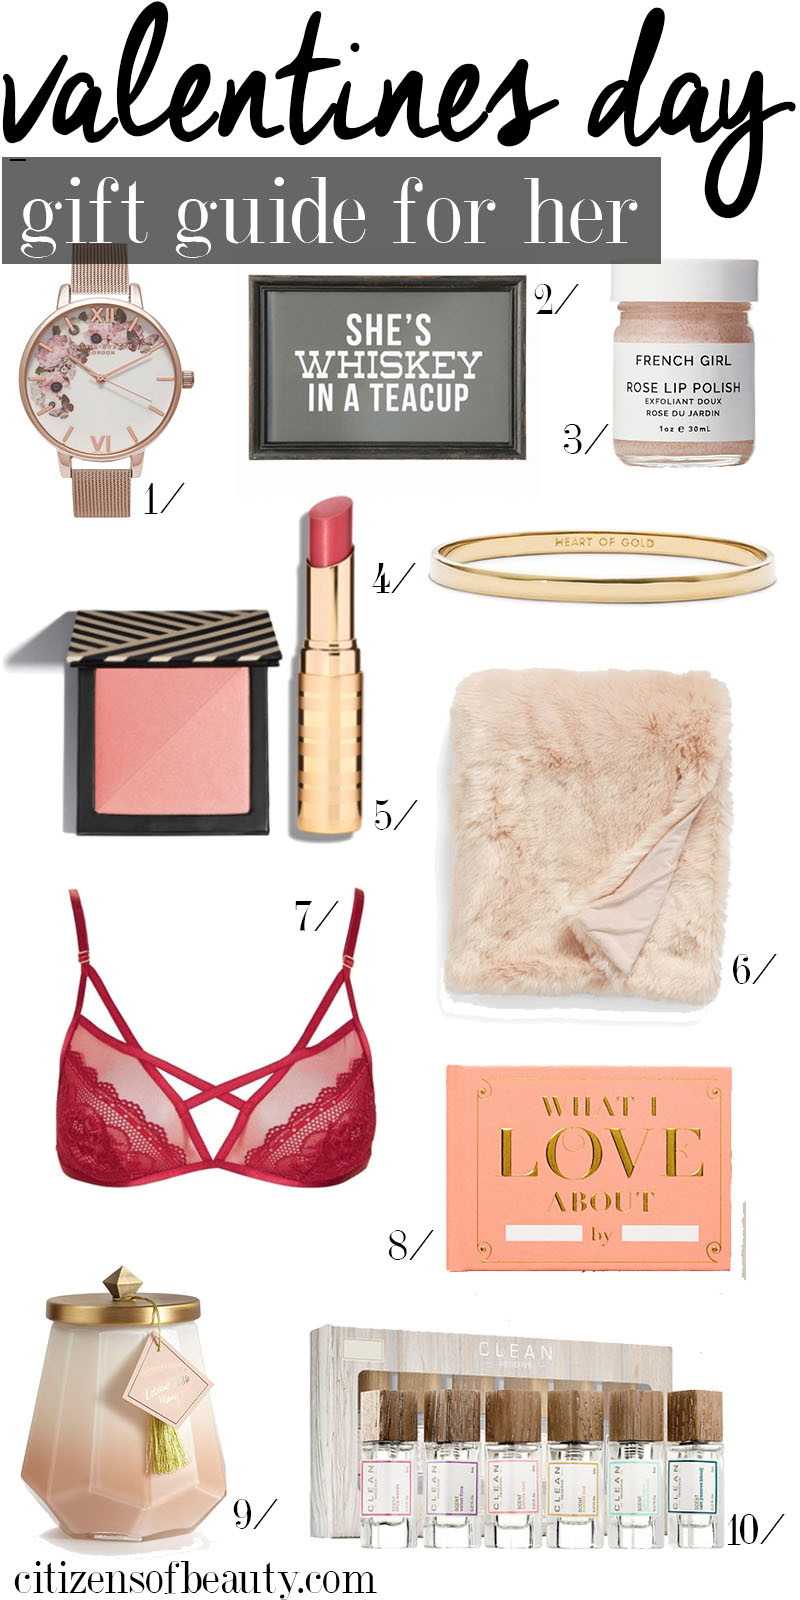 Valentines Day Gift Ideas For Her
 10 Gorgeous Valentines Day Gifts Ideas For Her Citizens